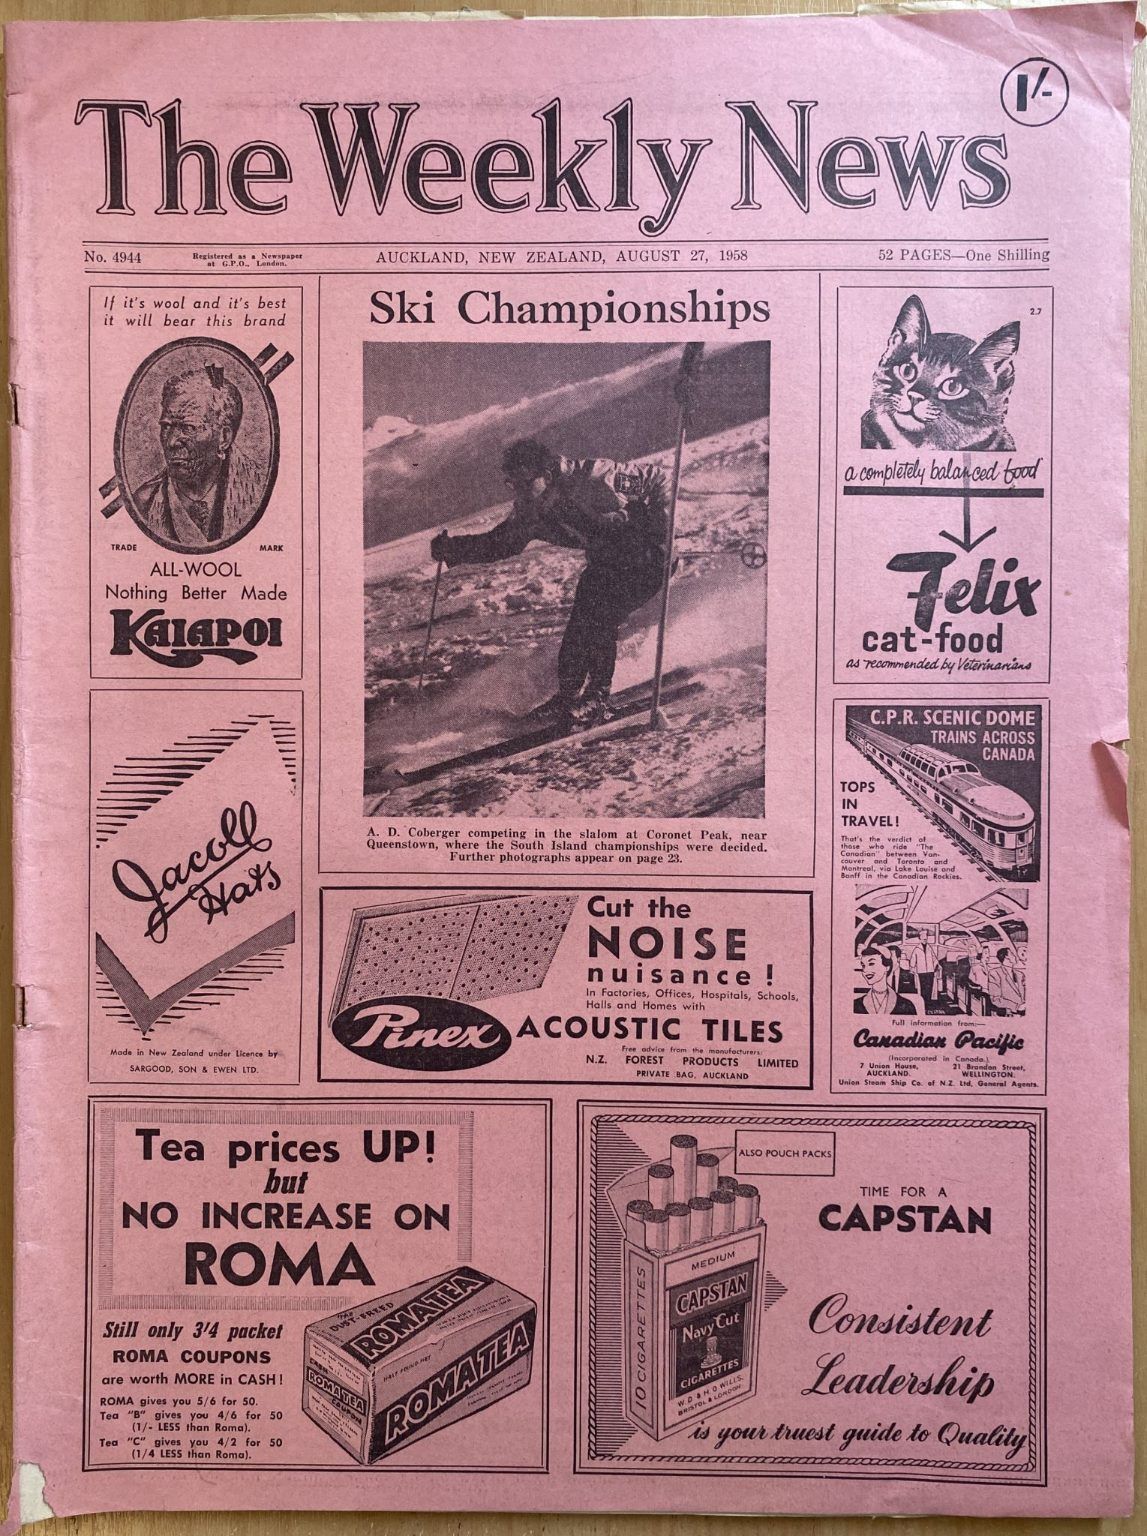 OLD NEWSPAPER: The Weekly News, No. 4944, 27 August 1958